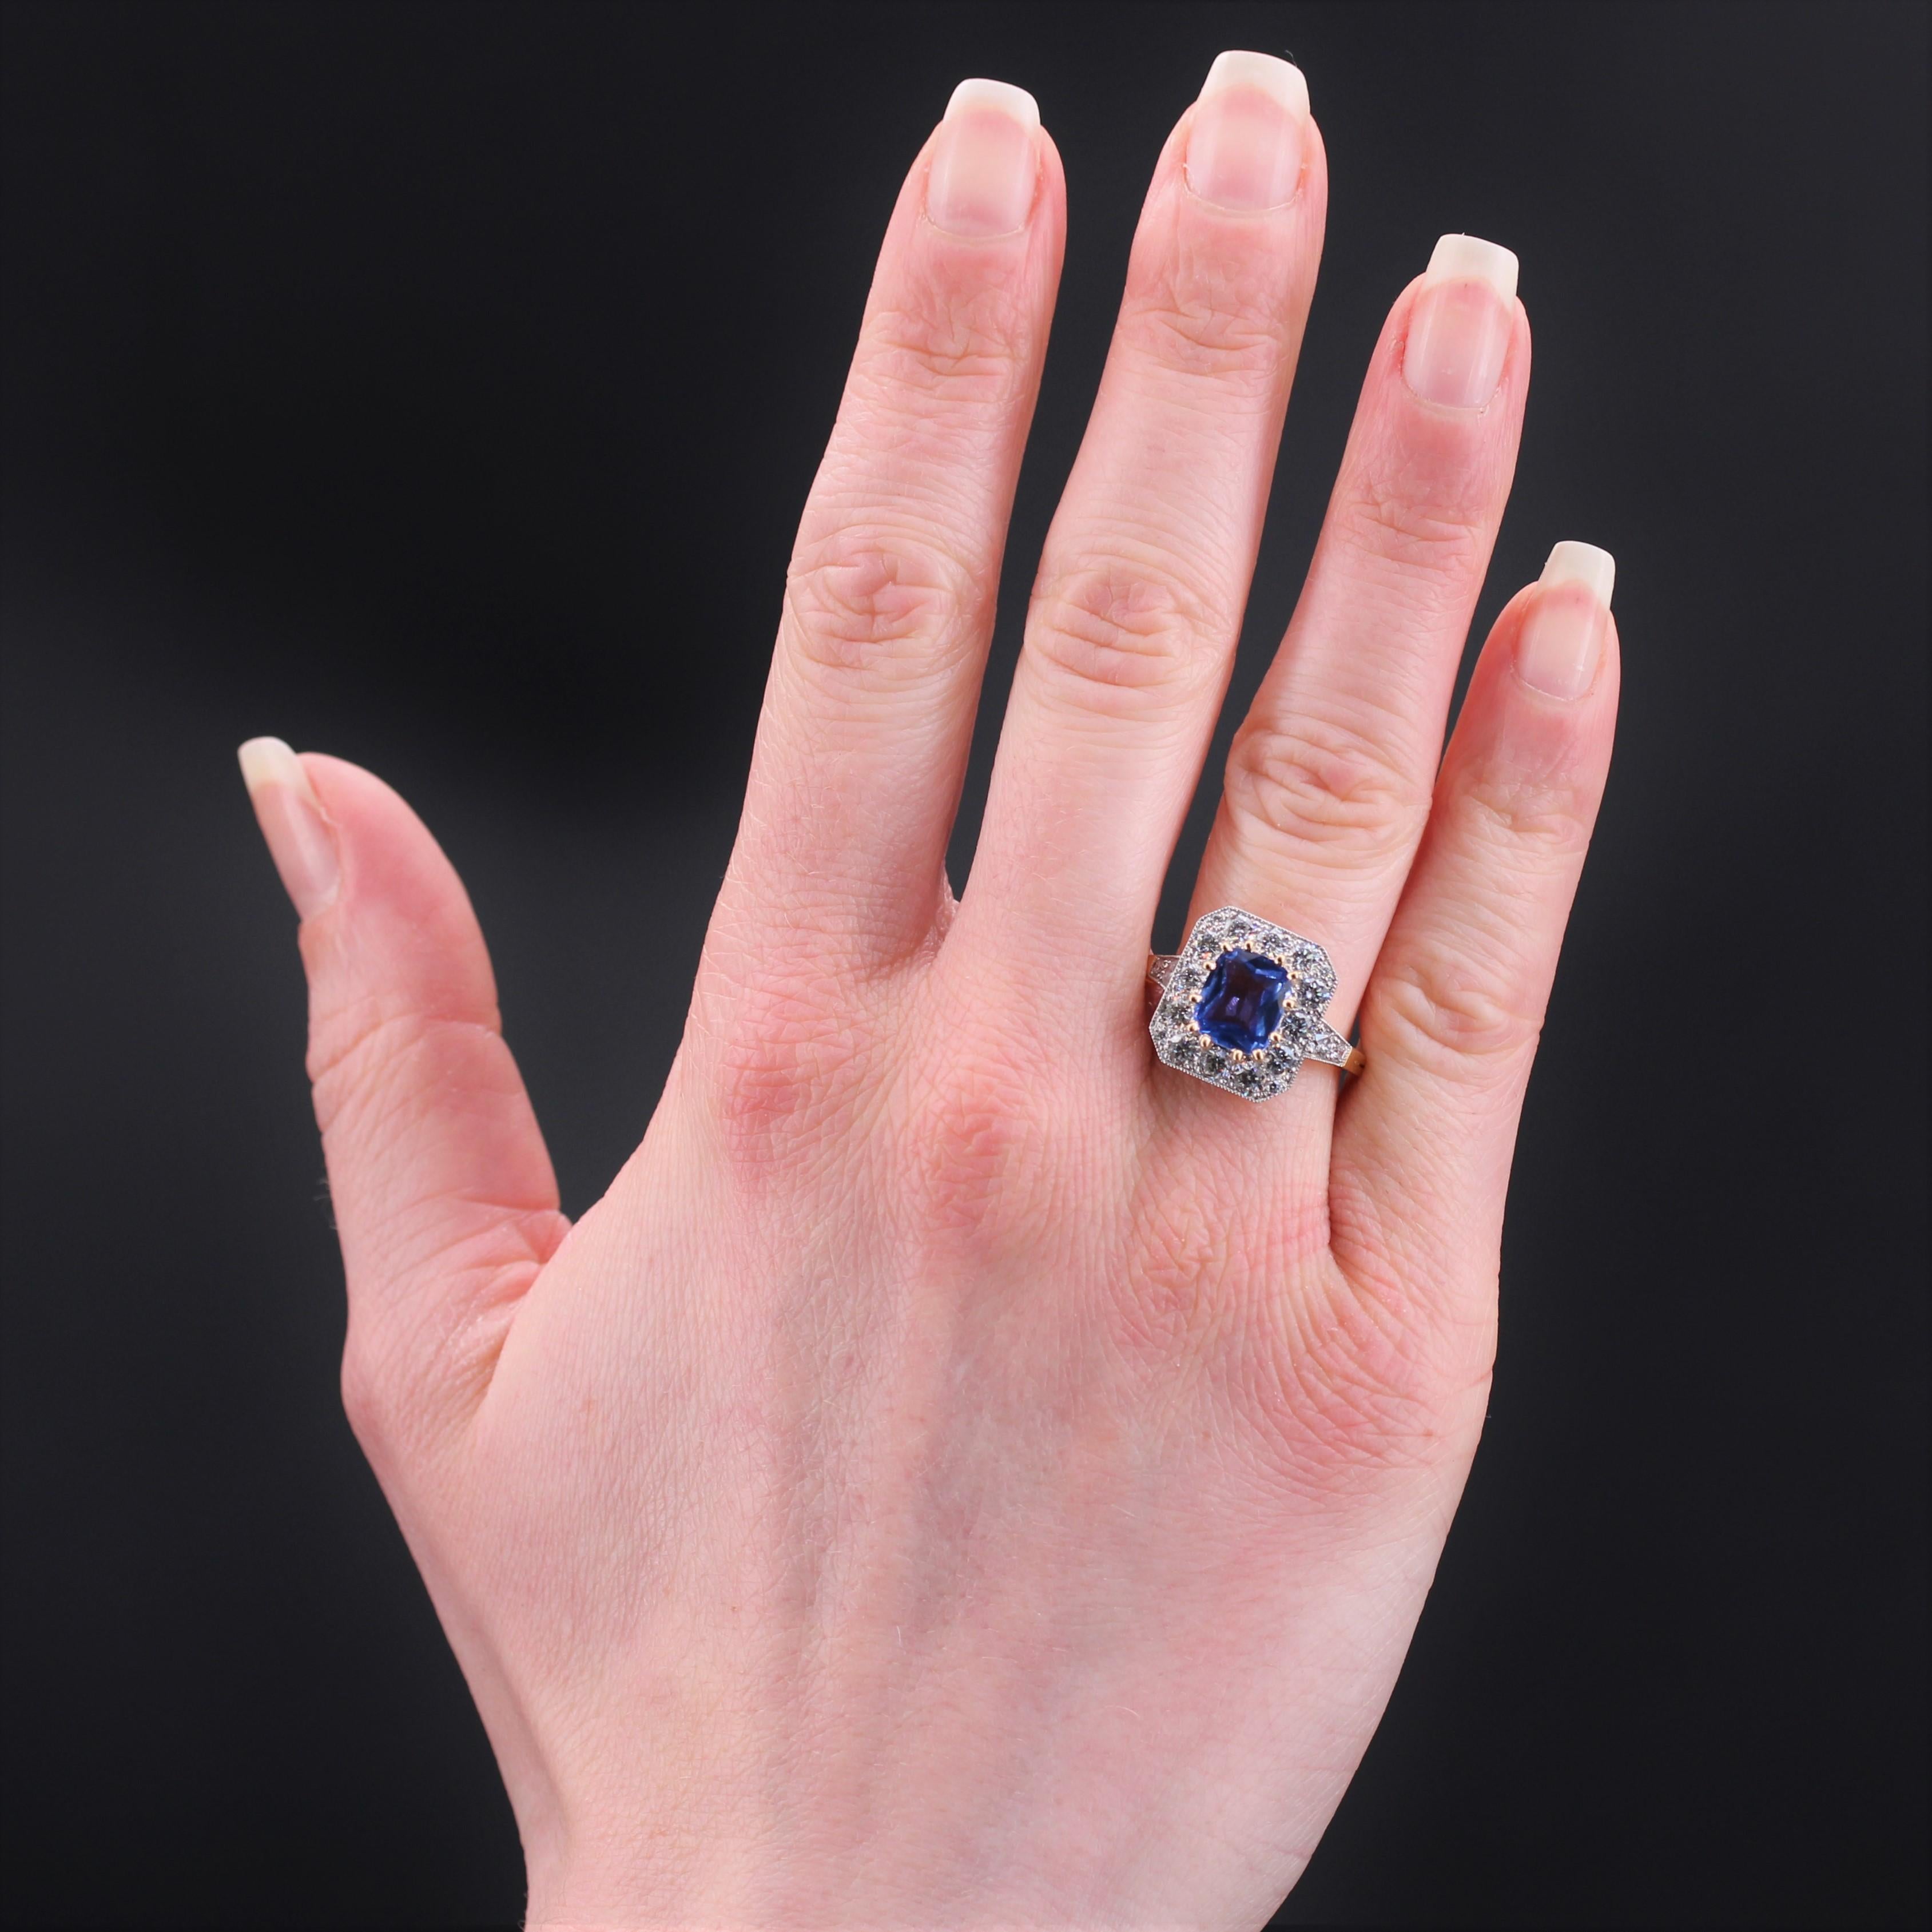 Ring in 18 karat yellow gold, eagle head hallmark and platinum, dog head hallmark.
This magnificent new ring of Art Deco inspiration is decorated on its top with a cushion-cut blue sapphire held in claws.
2x2 brilliant-cut diamonds set in fall